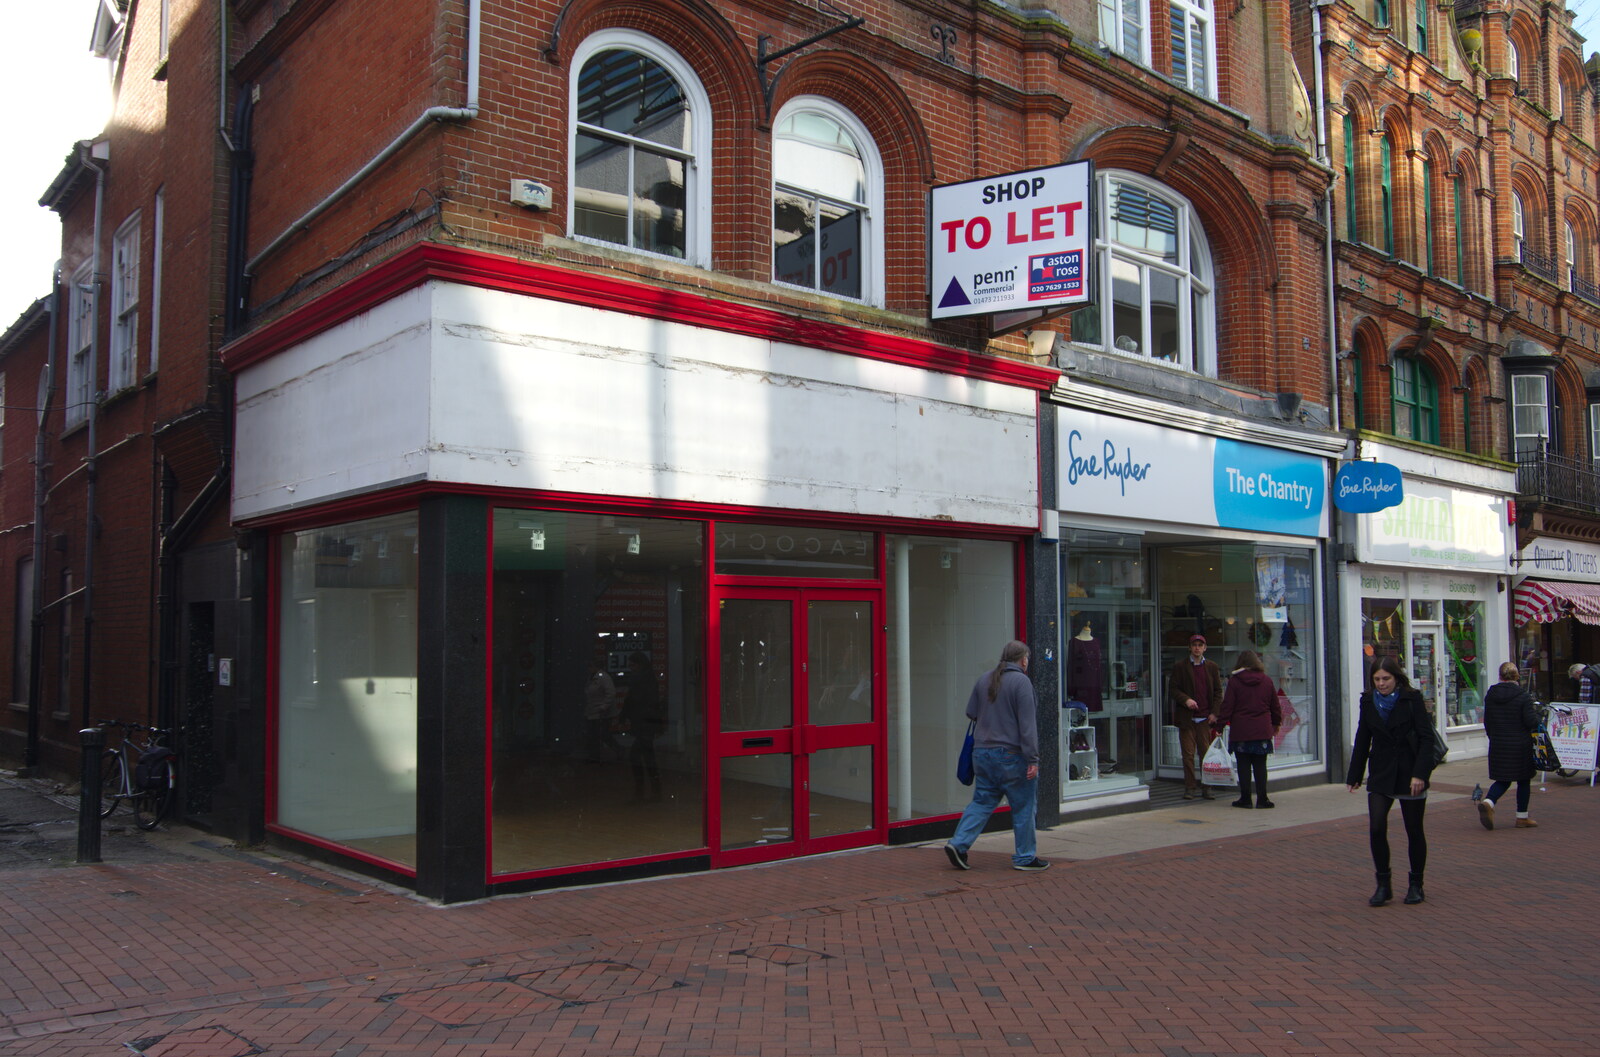 Another shop to let from Exam Day Dereliction, Ipswich, Suffolk - 13th November 2019